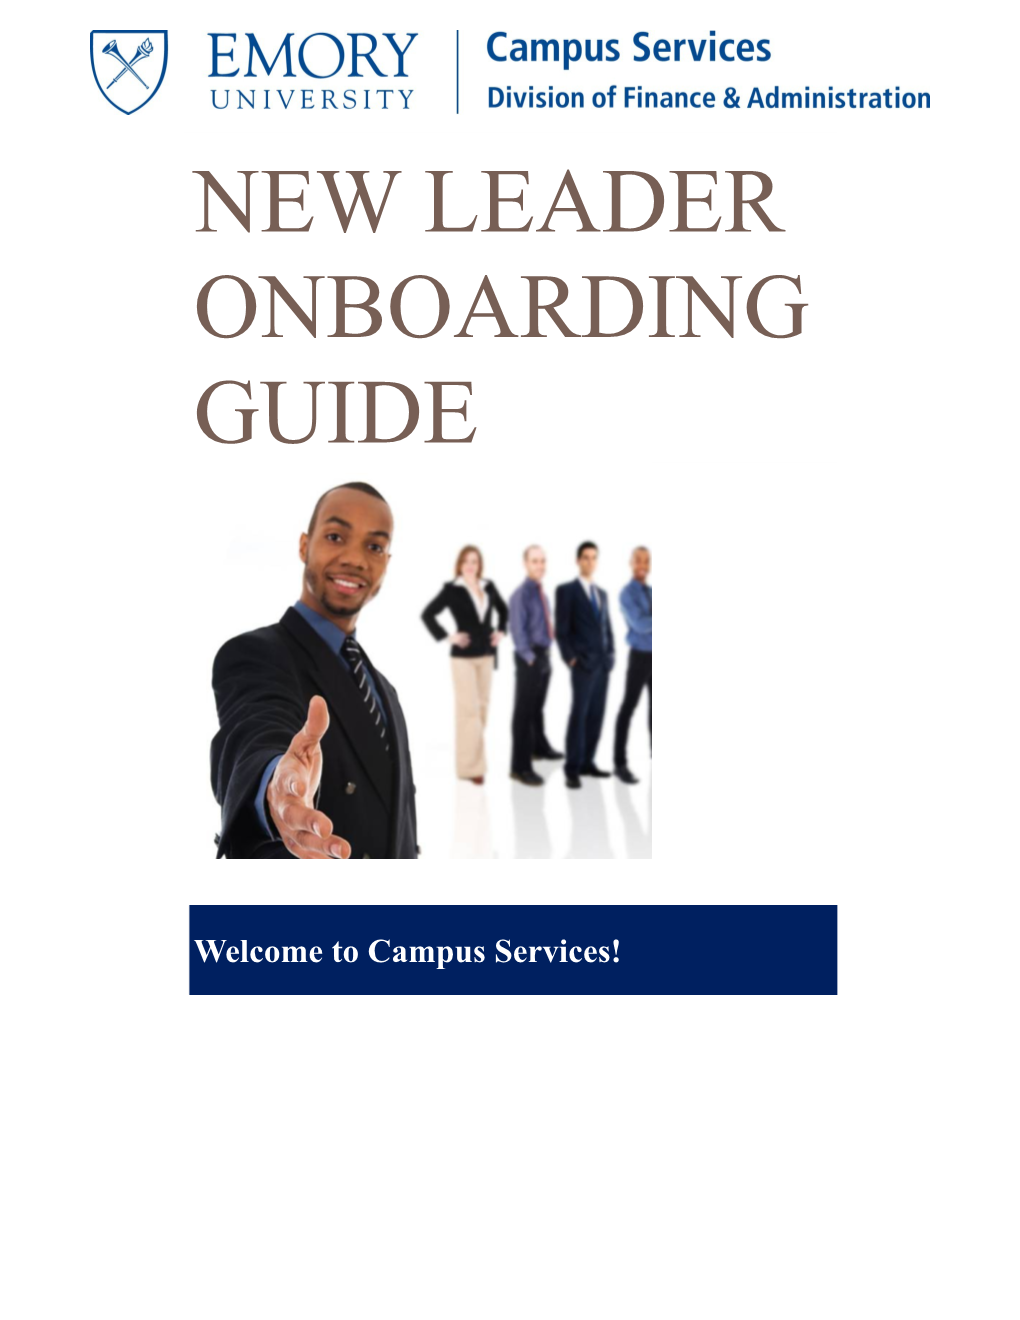 New Leader Onboarding Guide